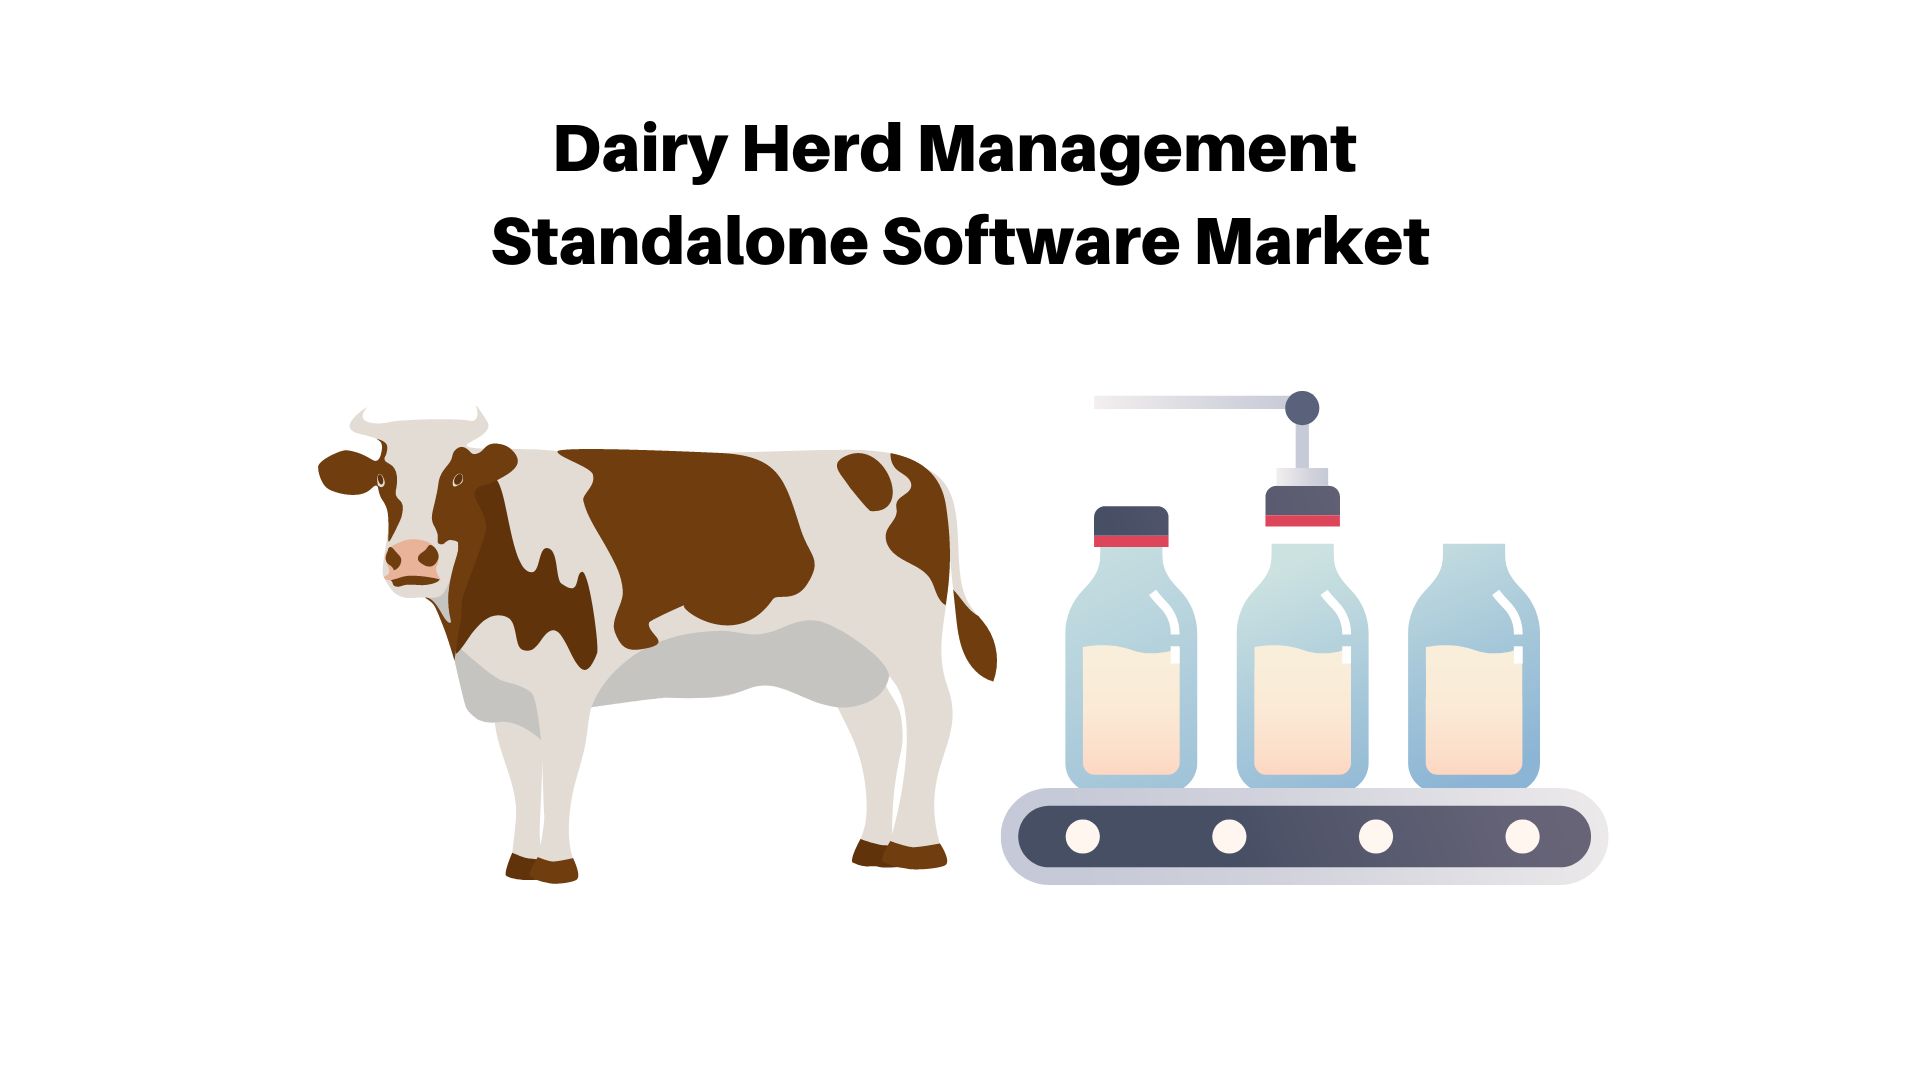 Dairy Herd Management Standalone Software Market Growth 7.50% | SWOT analysis up to 2032